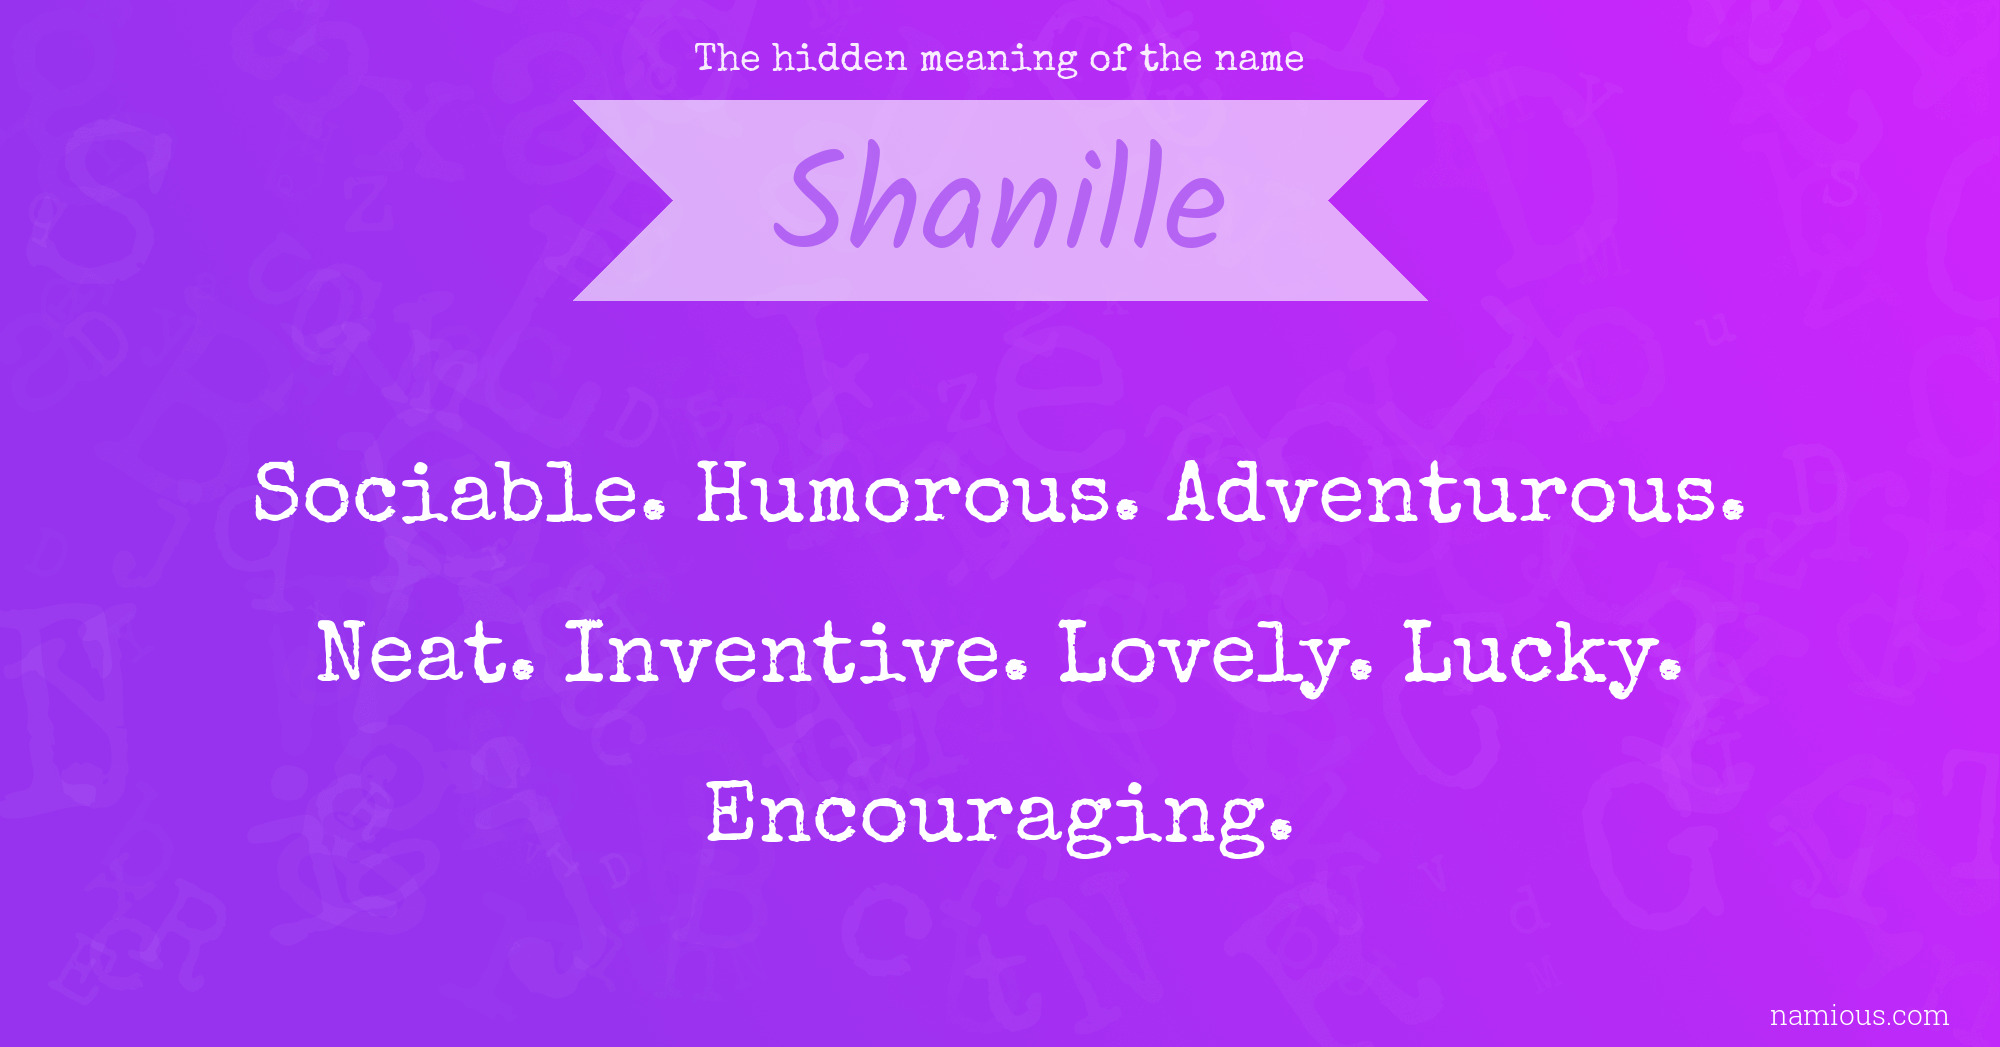 The hidden meaning of the name Shanille